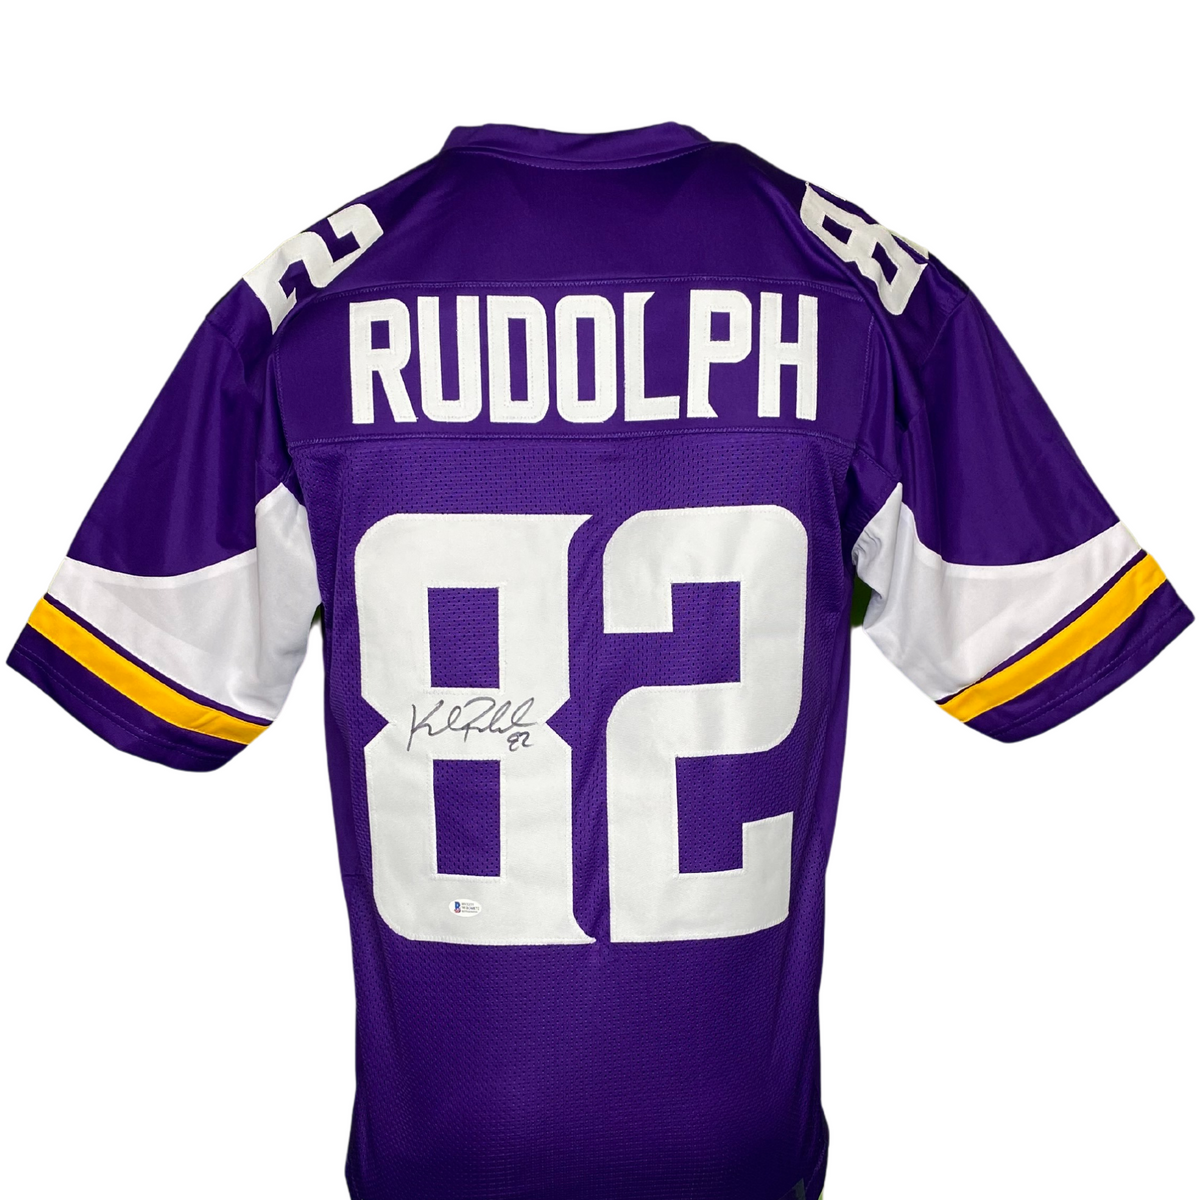 kyle rudolph signed jersey